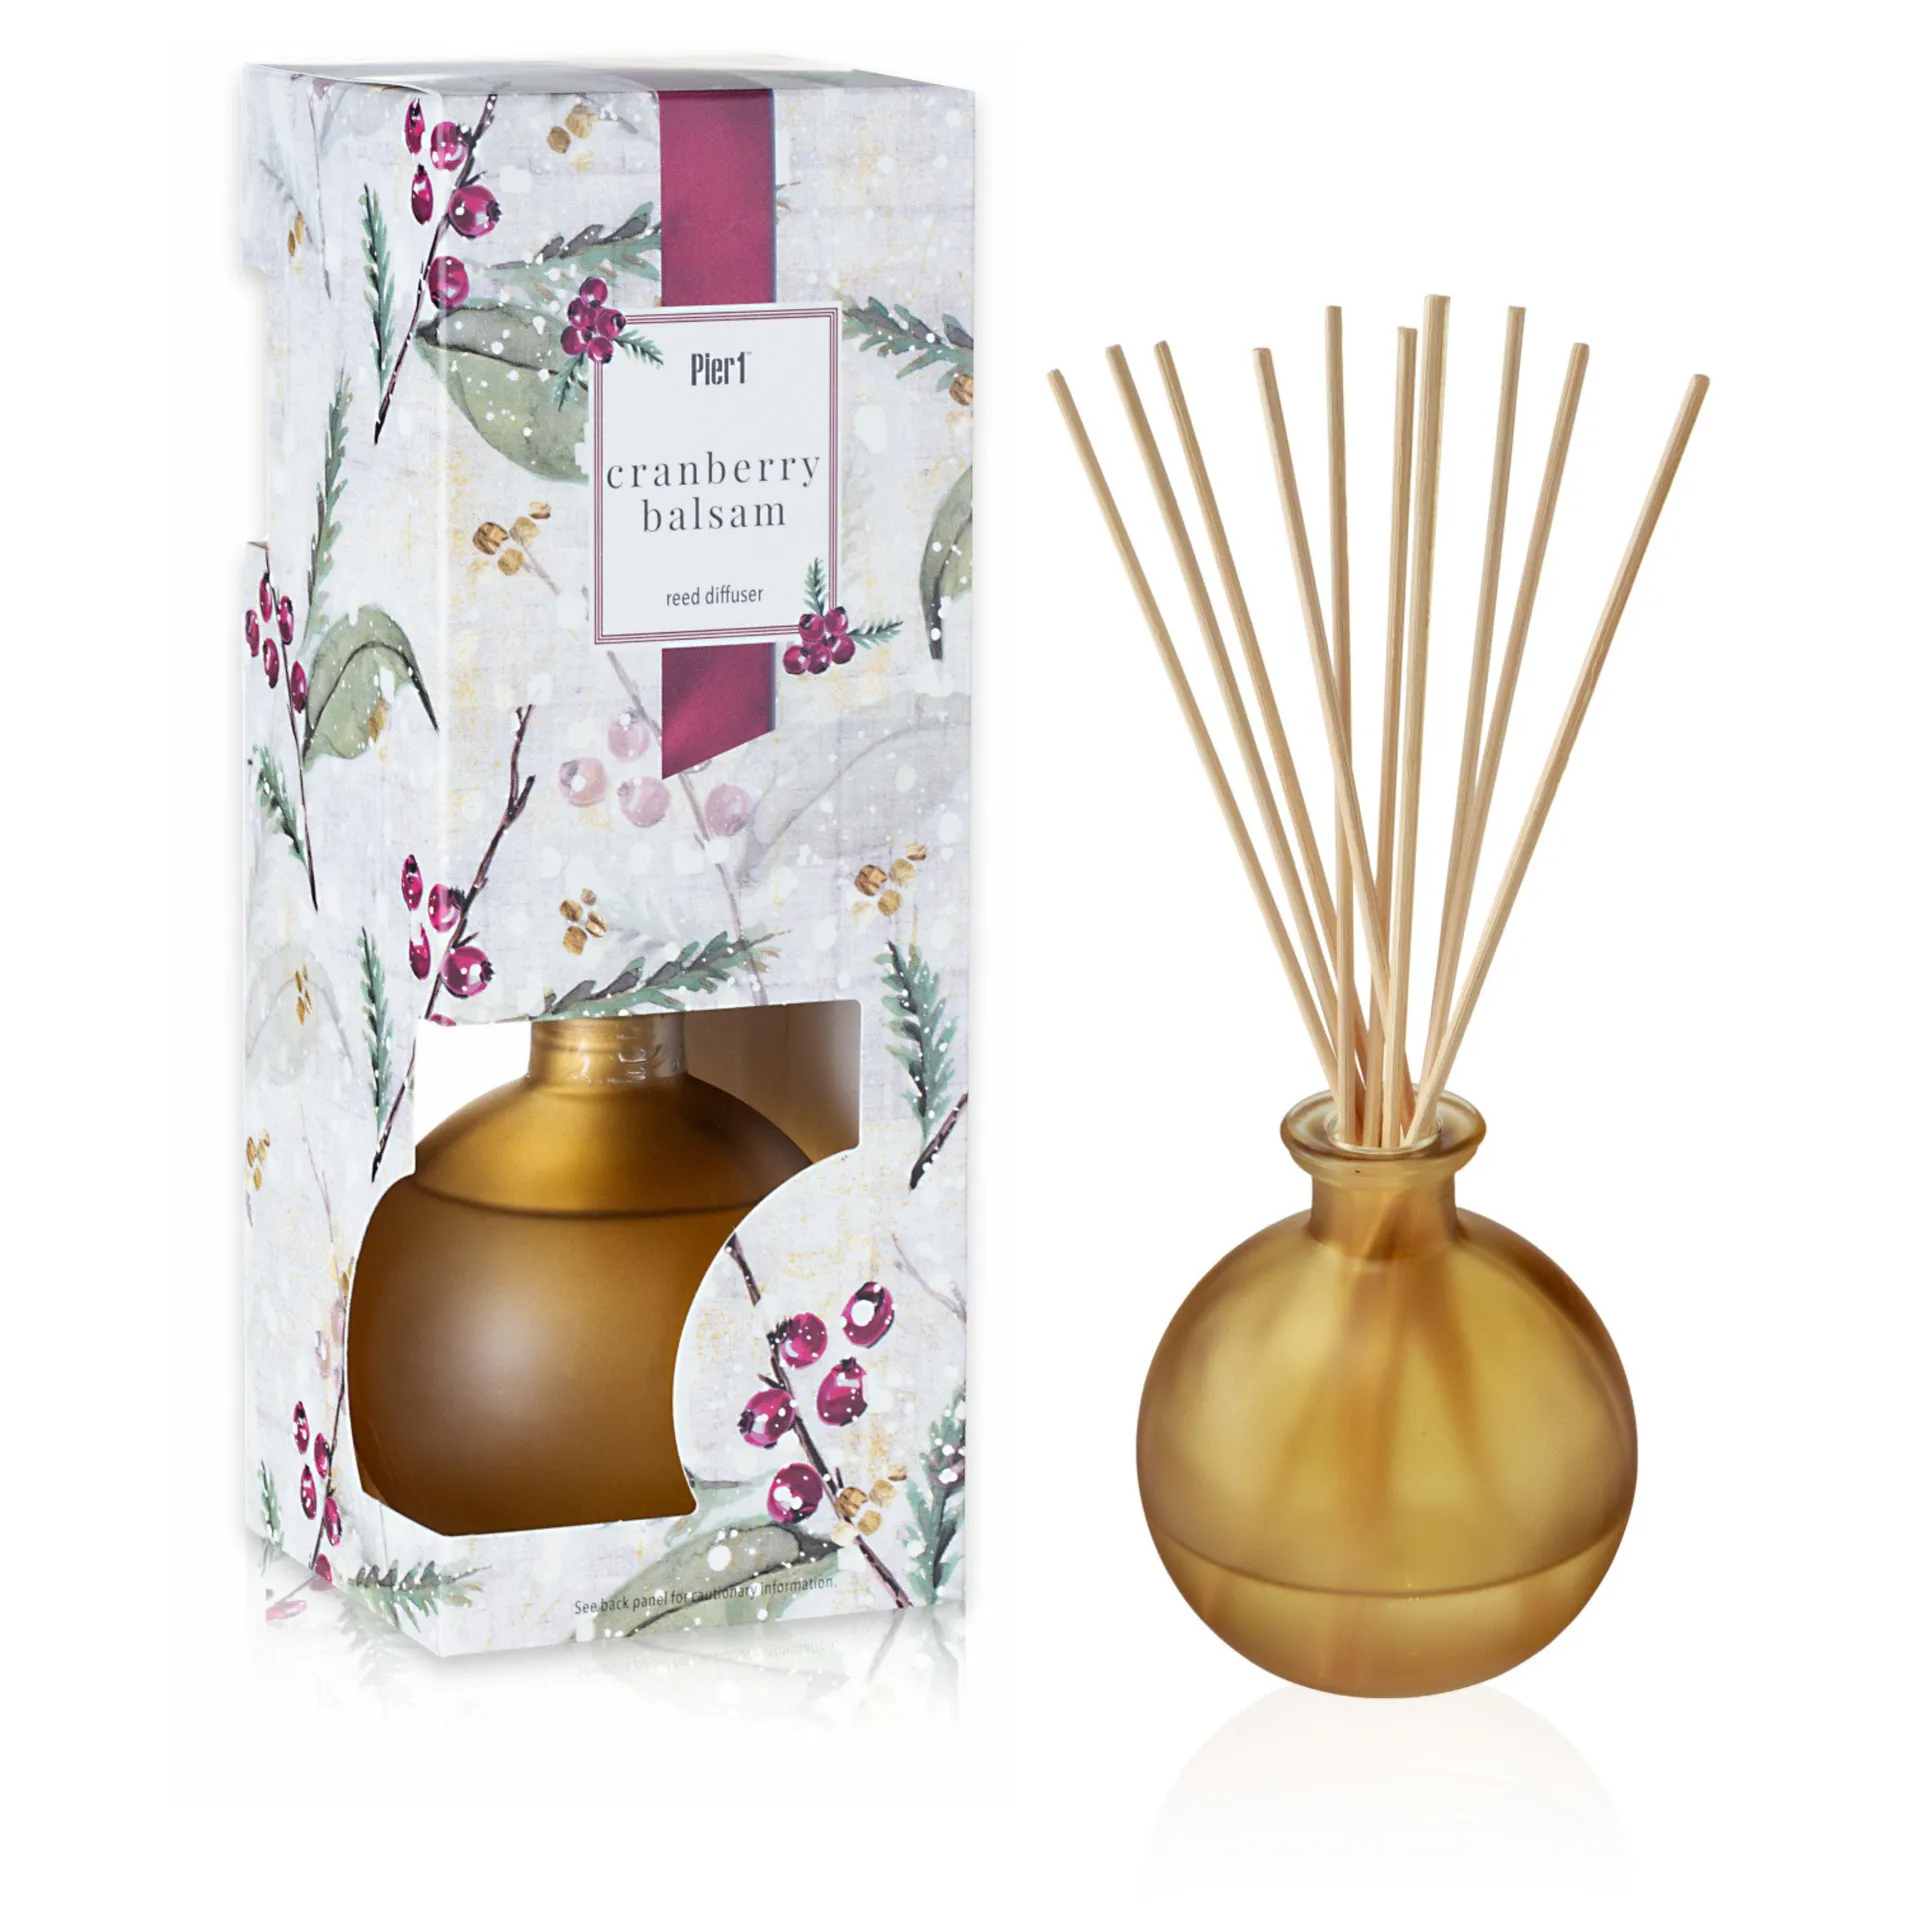 Pier 1 Cranberry Balsam Reed Diffuser